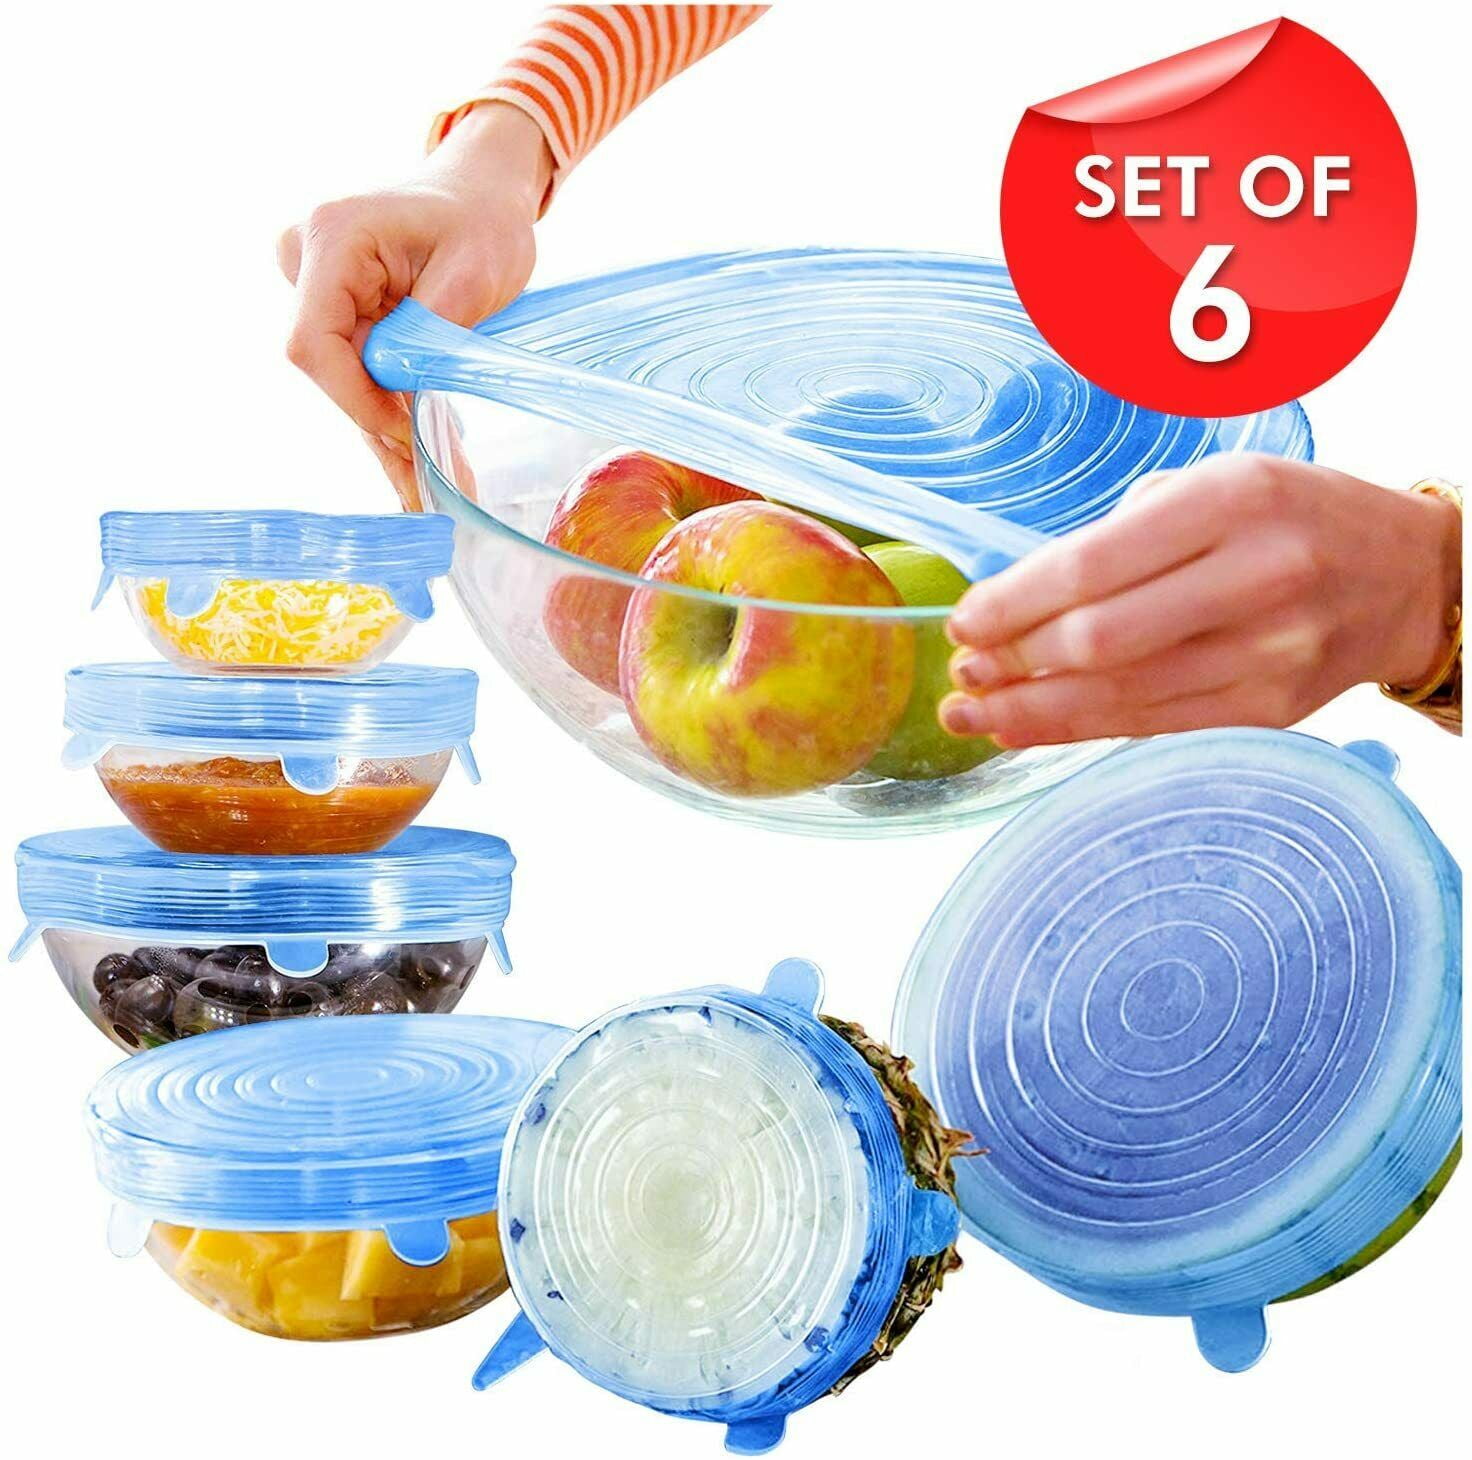 Ludlz Reusable Silicone Food Storage Bags